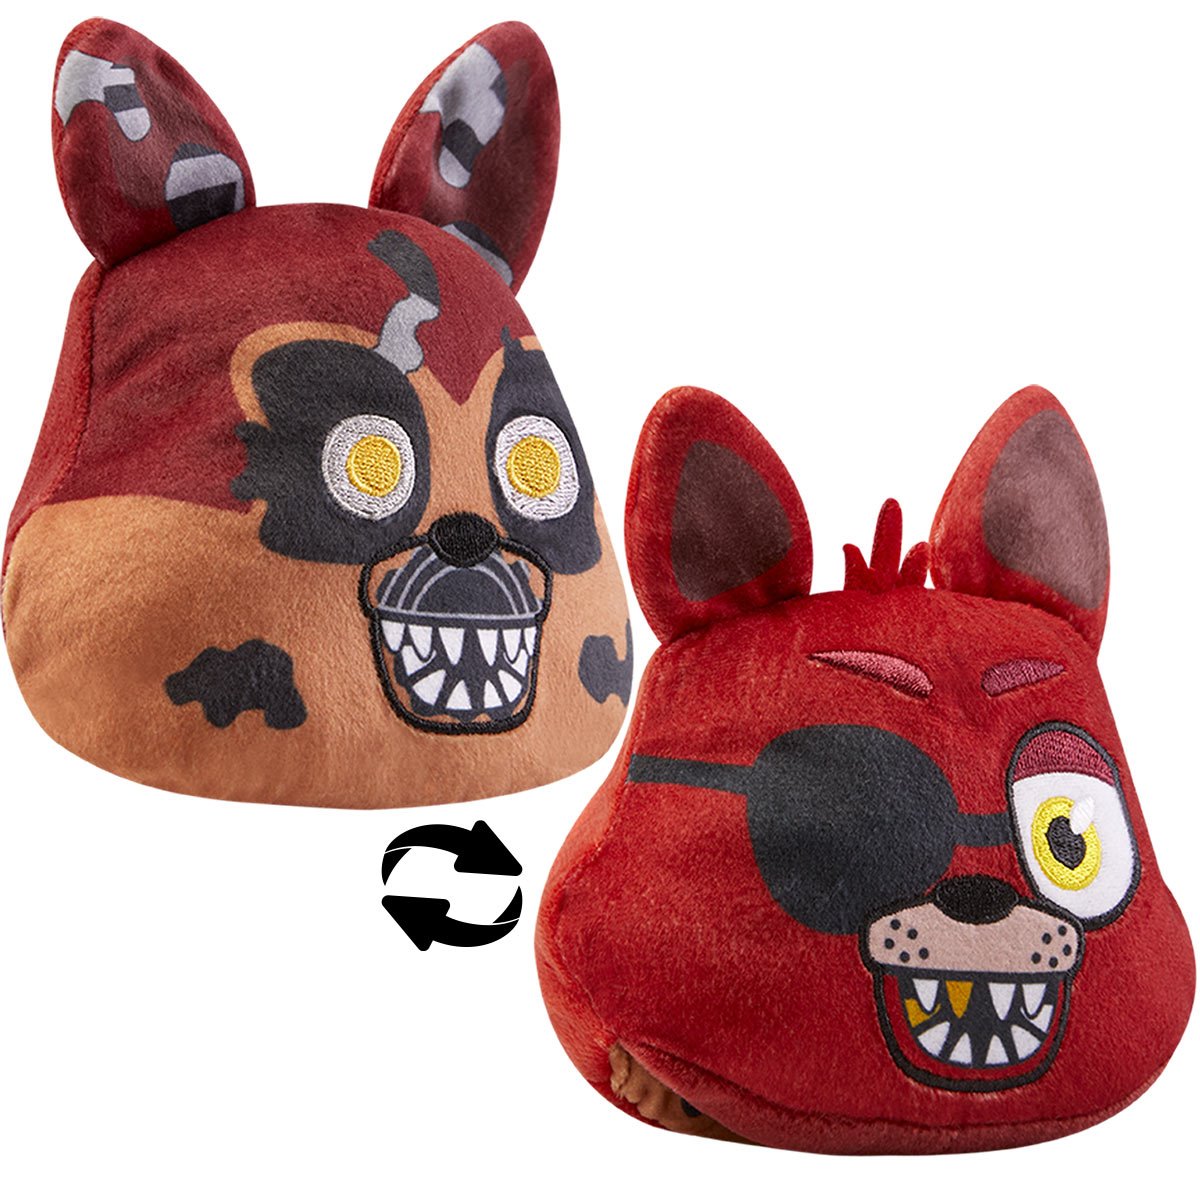 FNAF 4 Nightmare Foxy Plush 6. Display model only. No tags